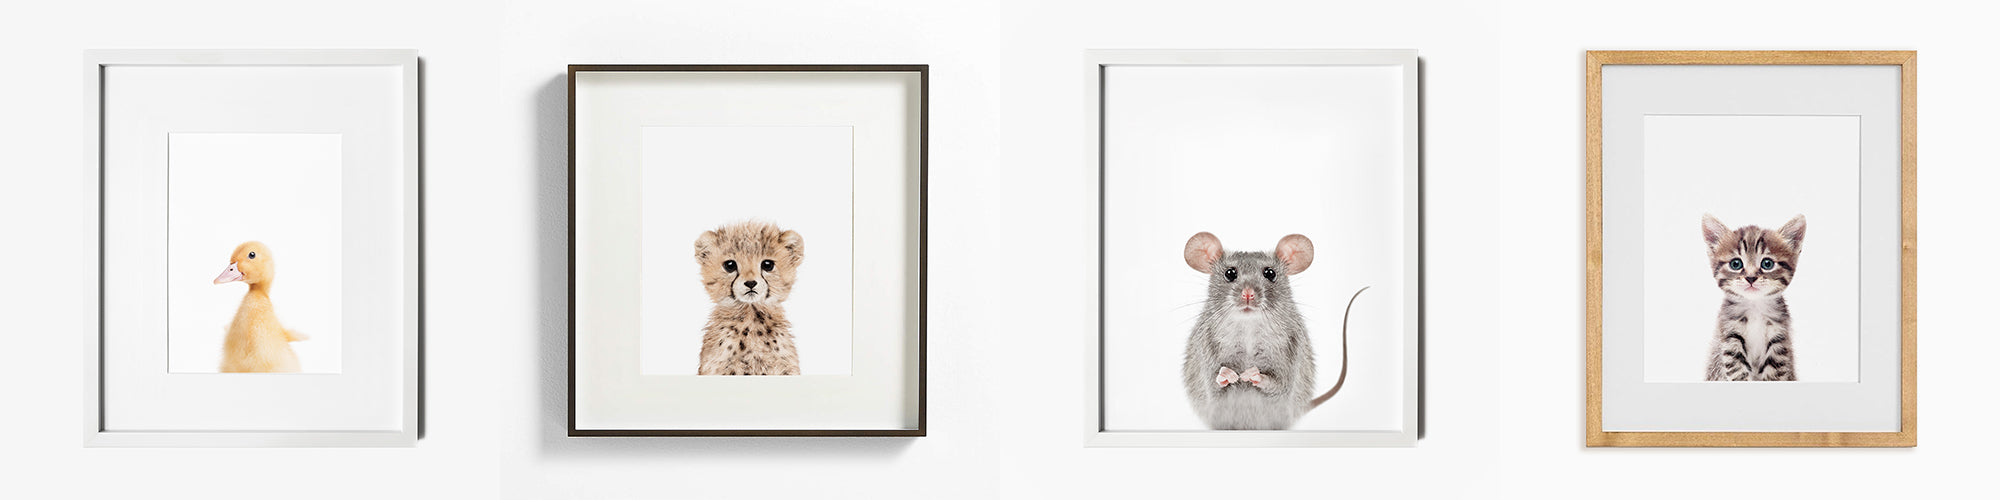 ideas where to find frames for nursery